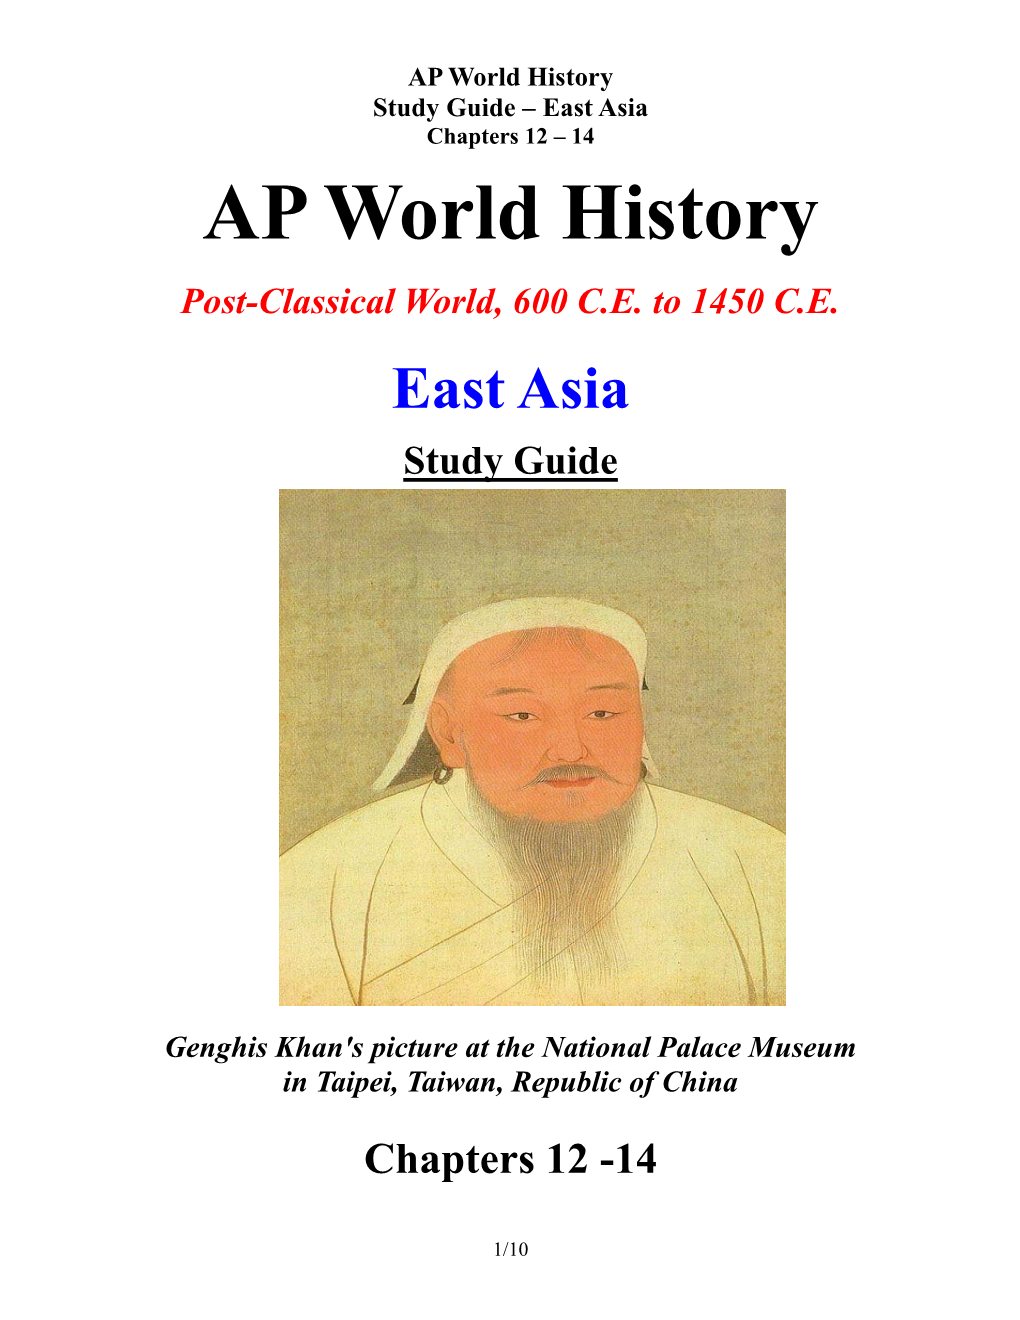 AP World History Study Guide – East Asia Chapters 12 – 14